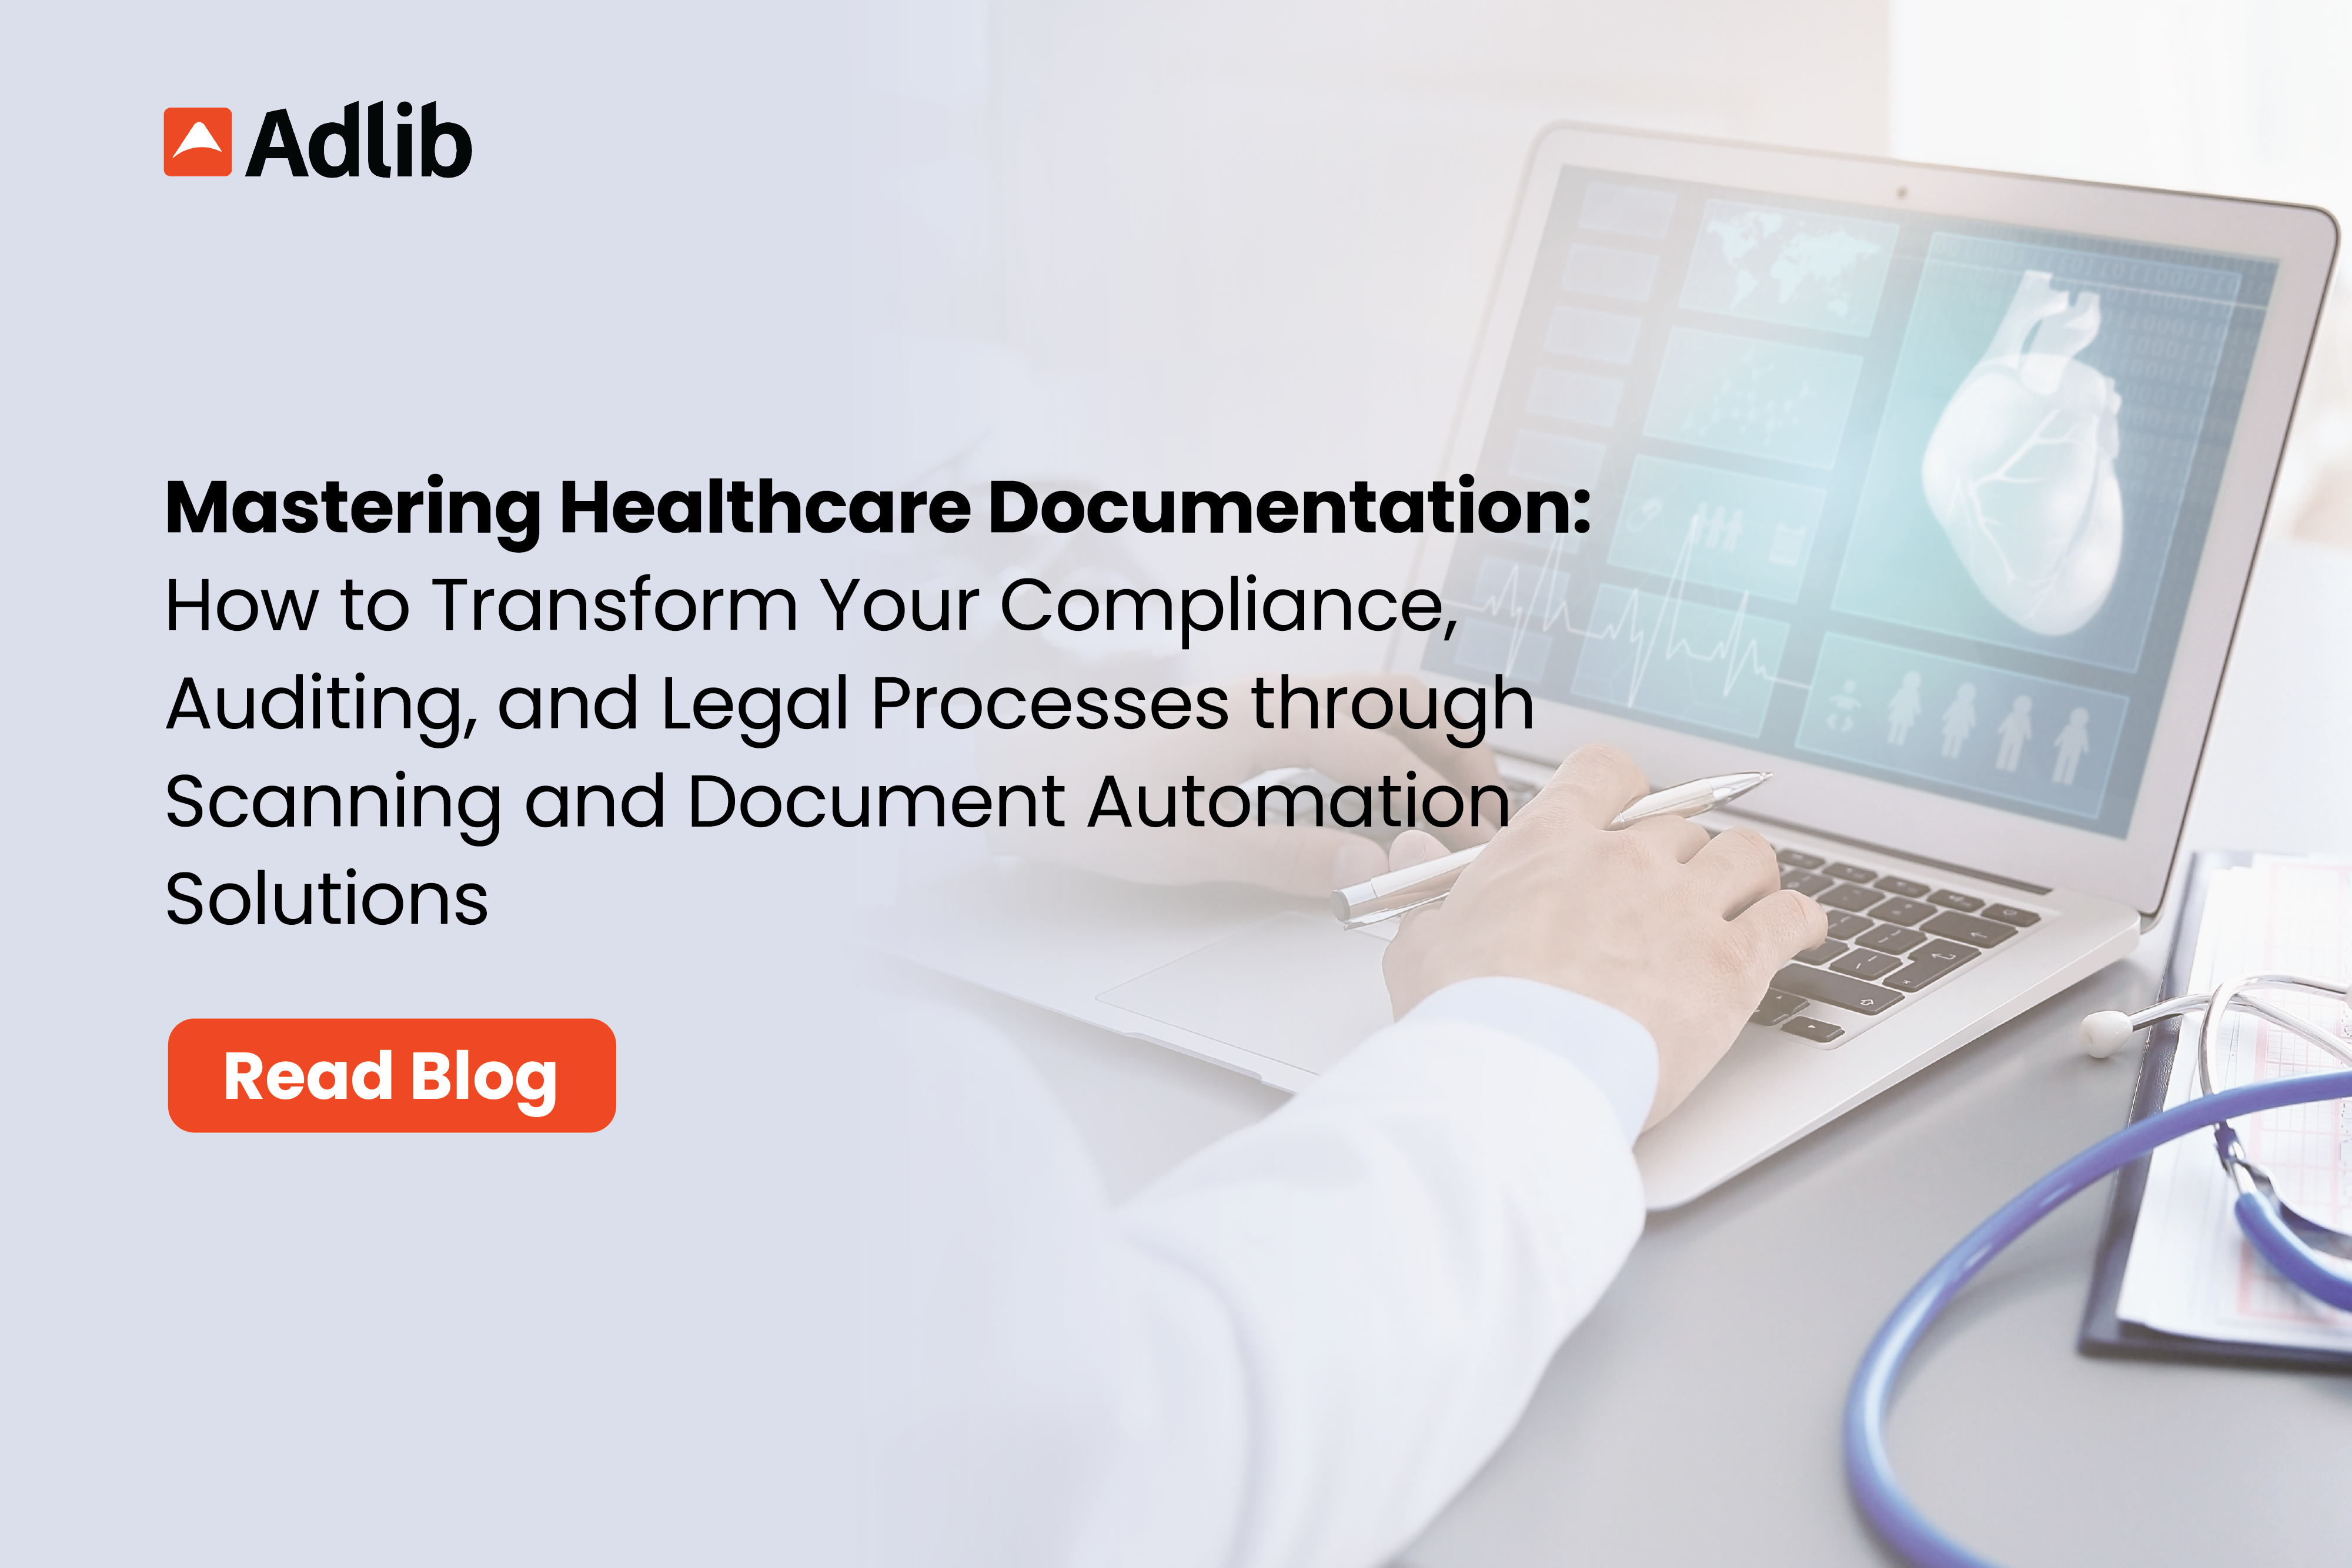 Mastering Healthcare Documentation with the Pros: How to Transform Your Compliance, Auditing, and Legal Processes through Scanning and Document Transformation Featured Image